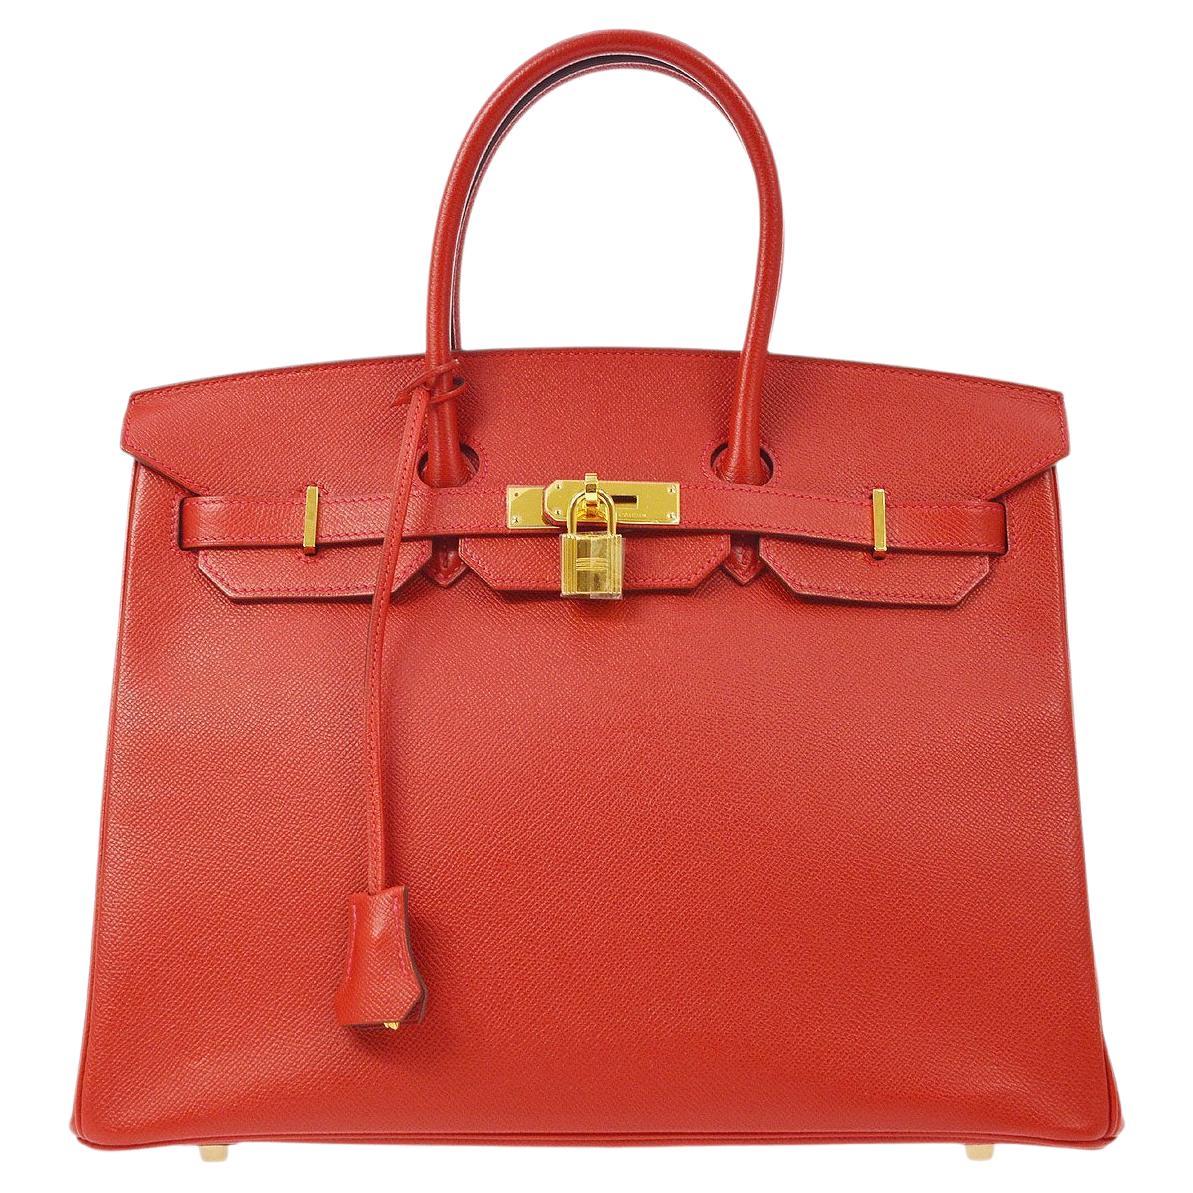 HERMES Birkin 35 Red Epsom Leather Gold Hardware Top Handle Tote Bag in Box